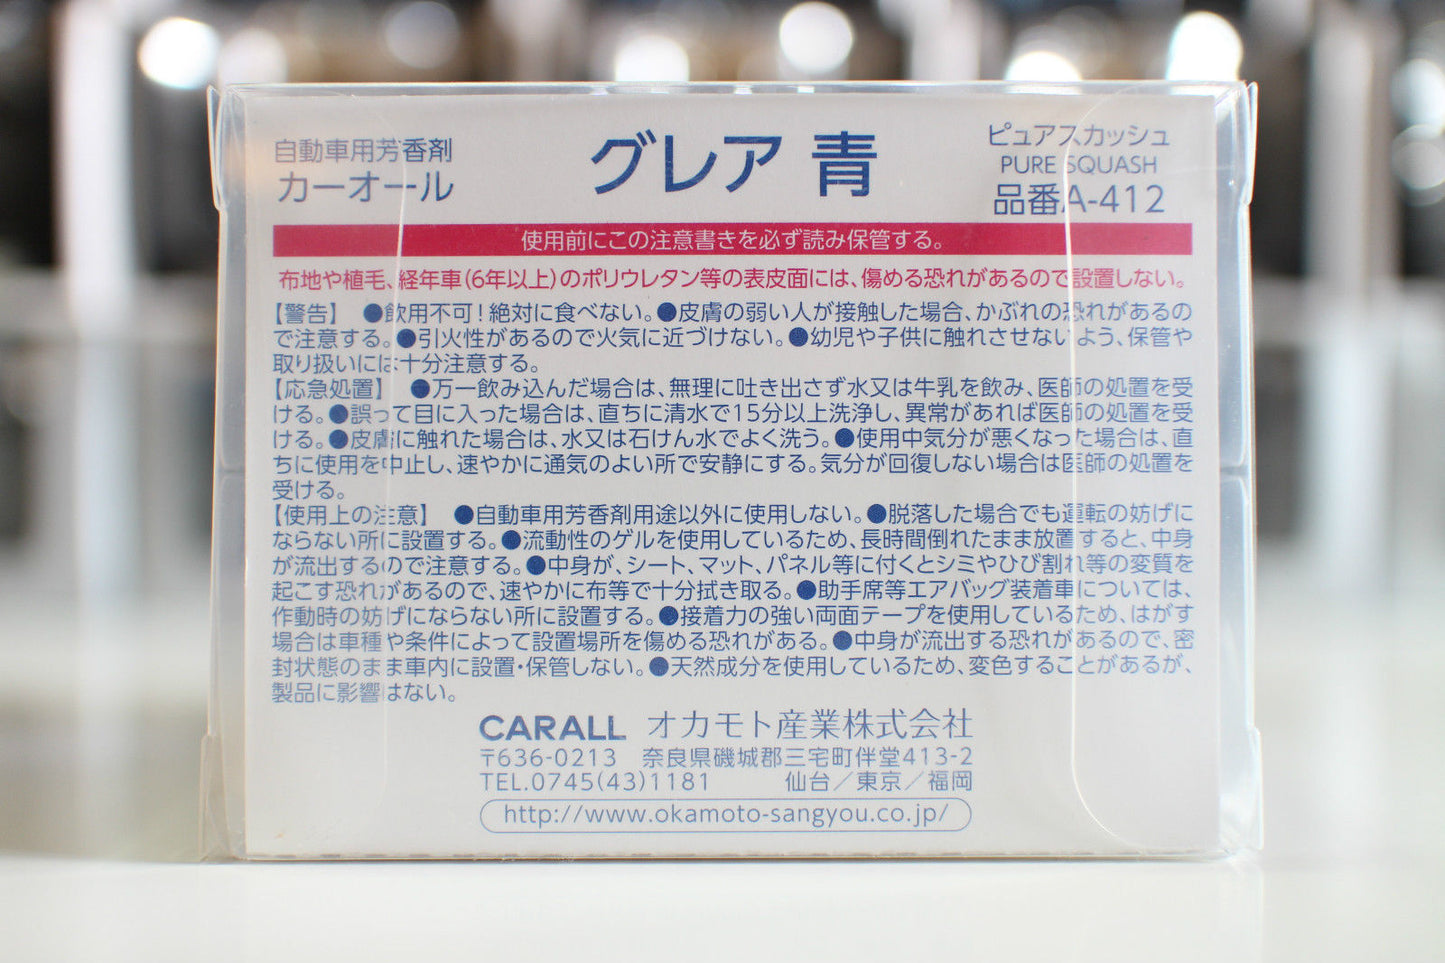 ***DISCONTINUED*** Carall Glare Air Freshener - Made in Japan - Pure Squash (A-412)